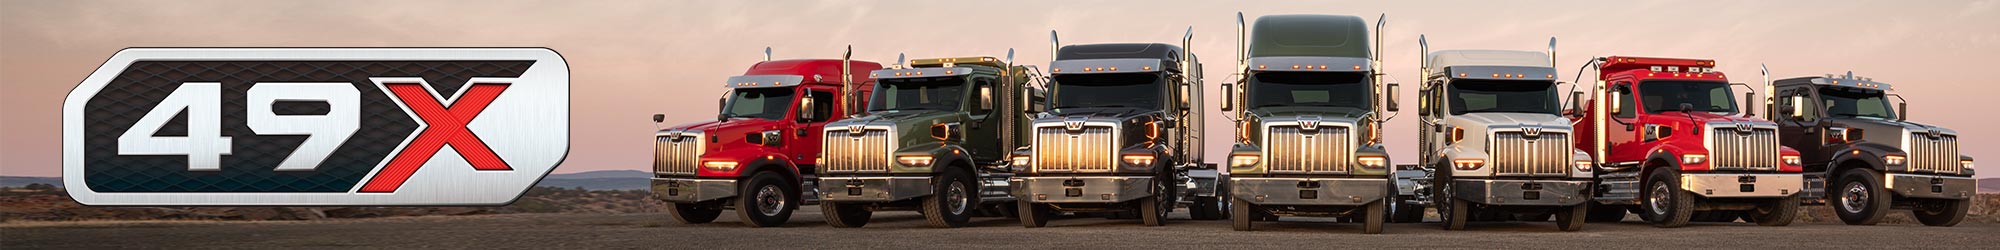 The All-New Western Star 49X Family of Trucks